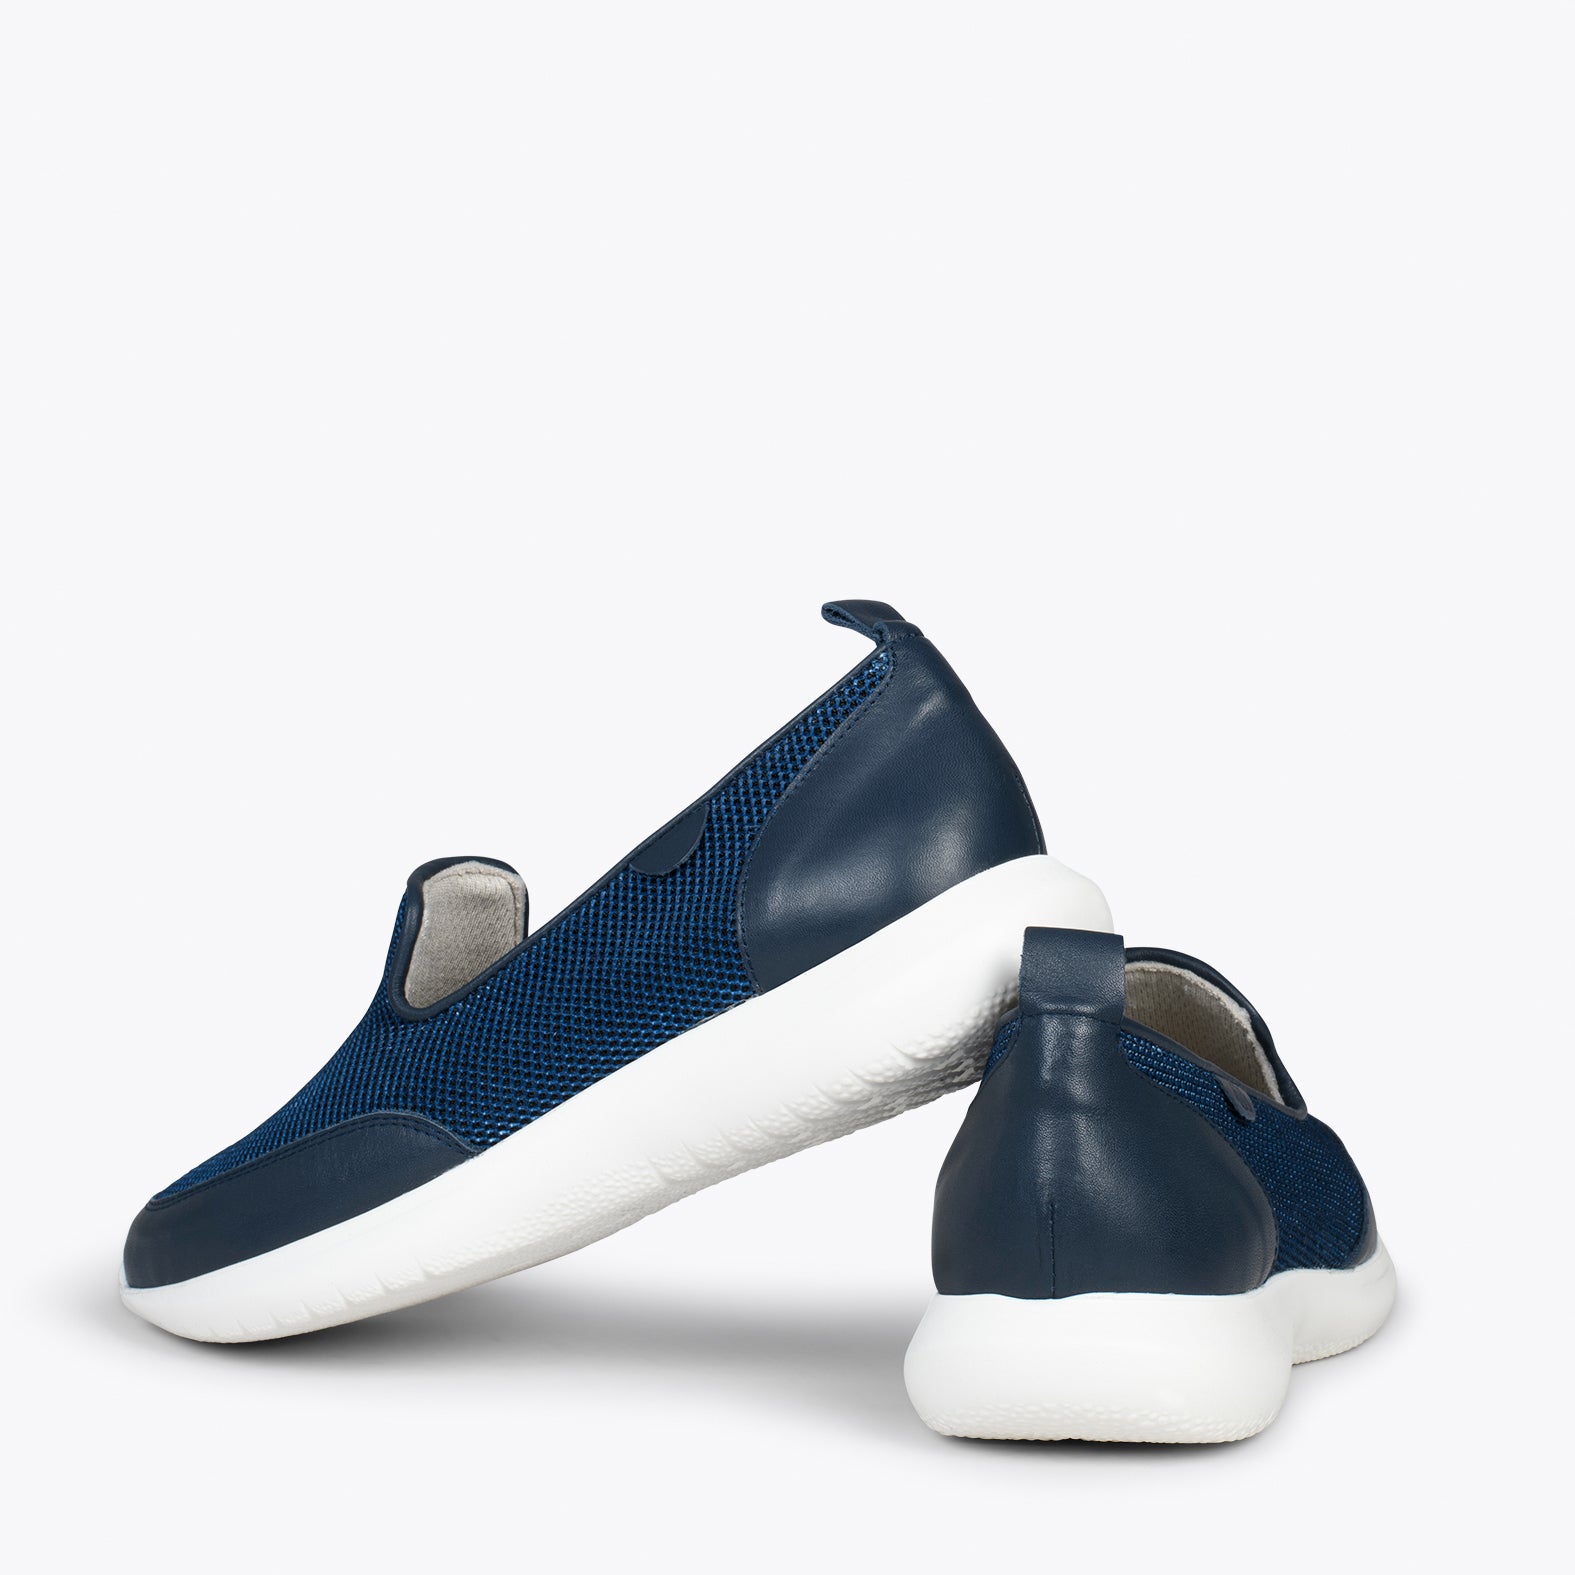 SLIPPER SPORT – NAVY sneakers with no laces and mesh design